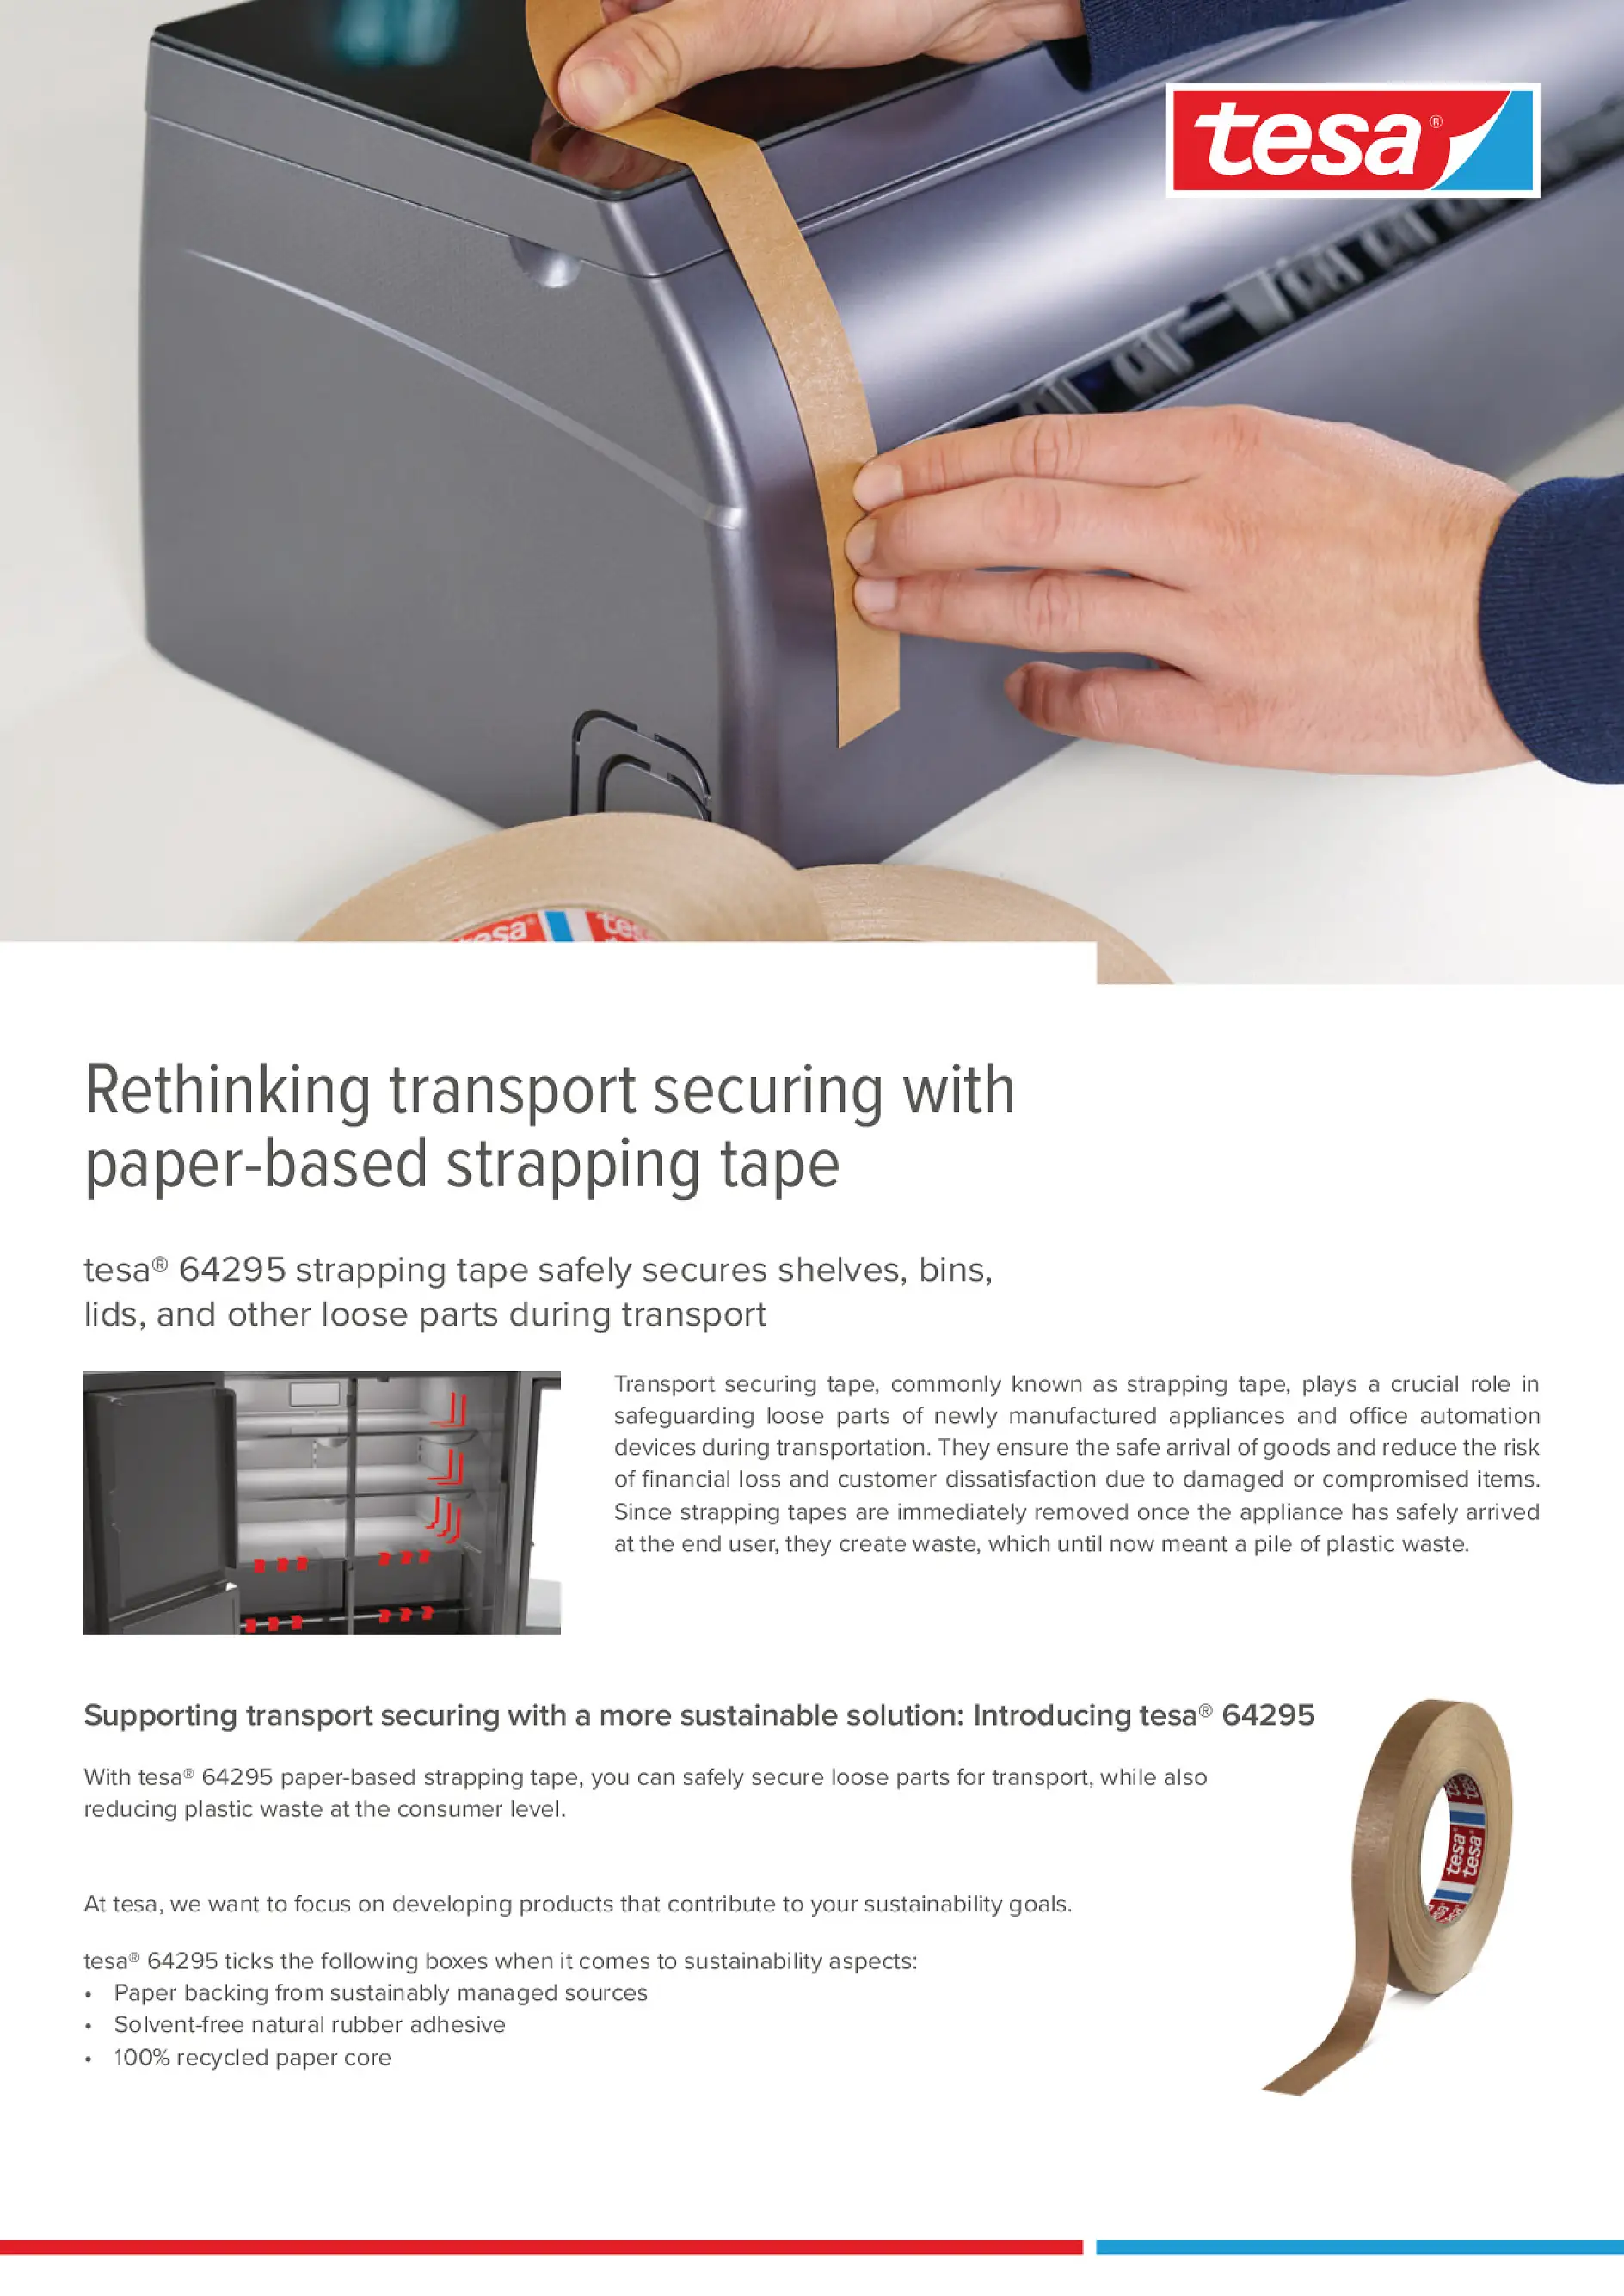 Home Appliances - paper-based strapping tape tesa® 64295 for transport securing